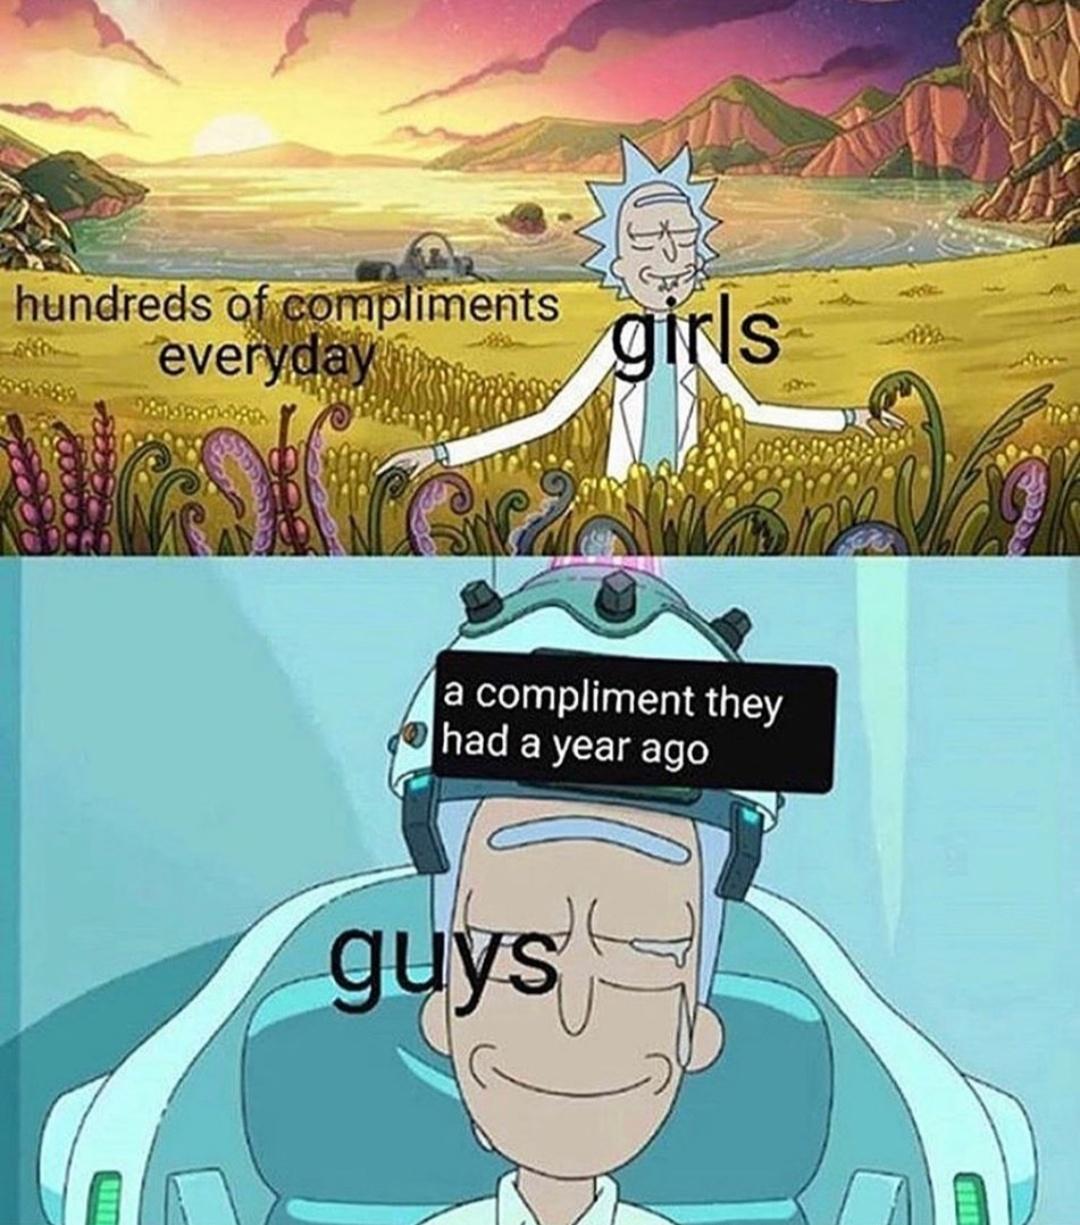 guys vs girls compliments - hundreds of compliments everyday girls a compliment they had a year ago guys